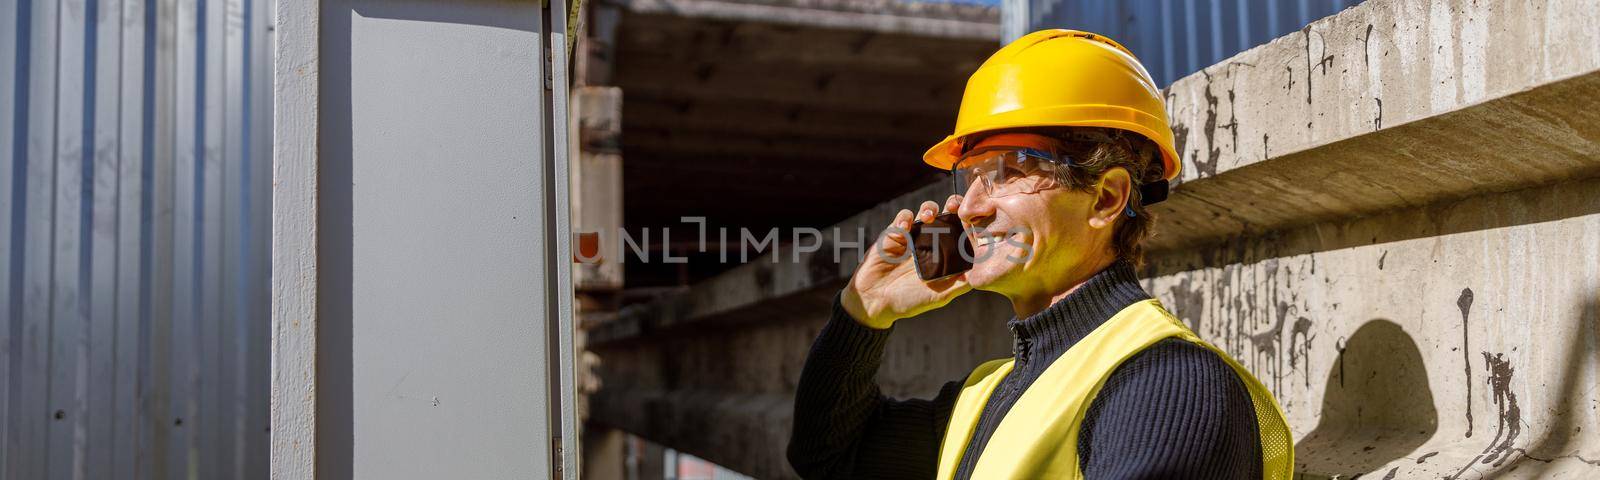 Cheerful matured man in safety helmet having phone conversation and smiling while working at manufacturing plant